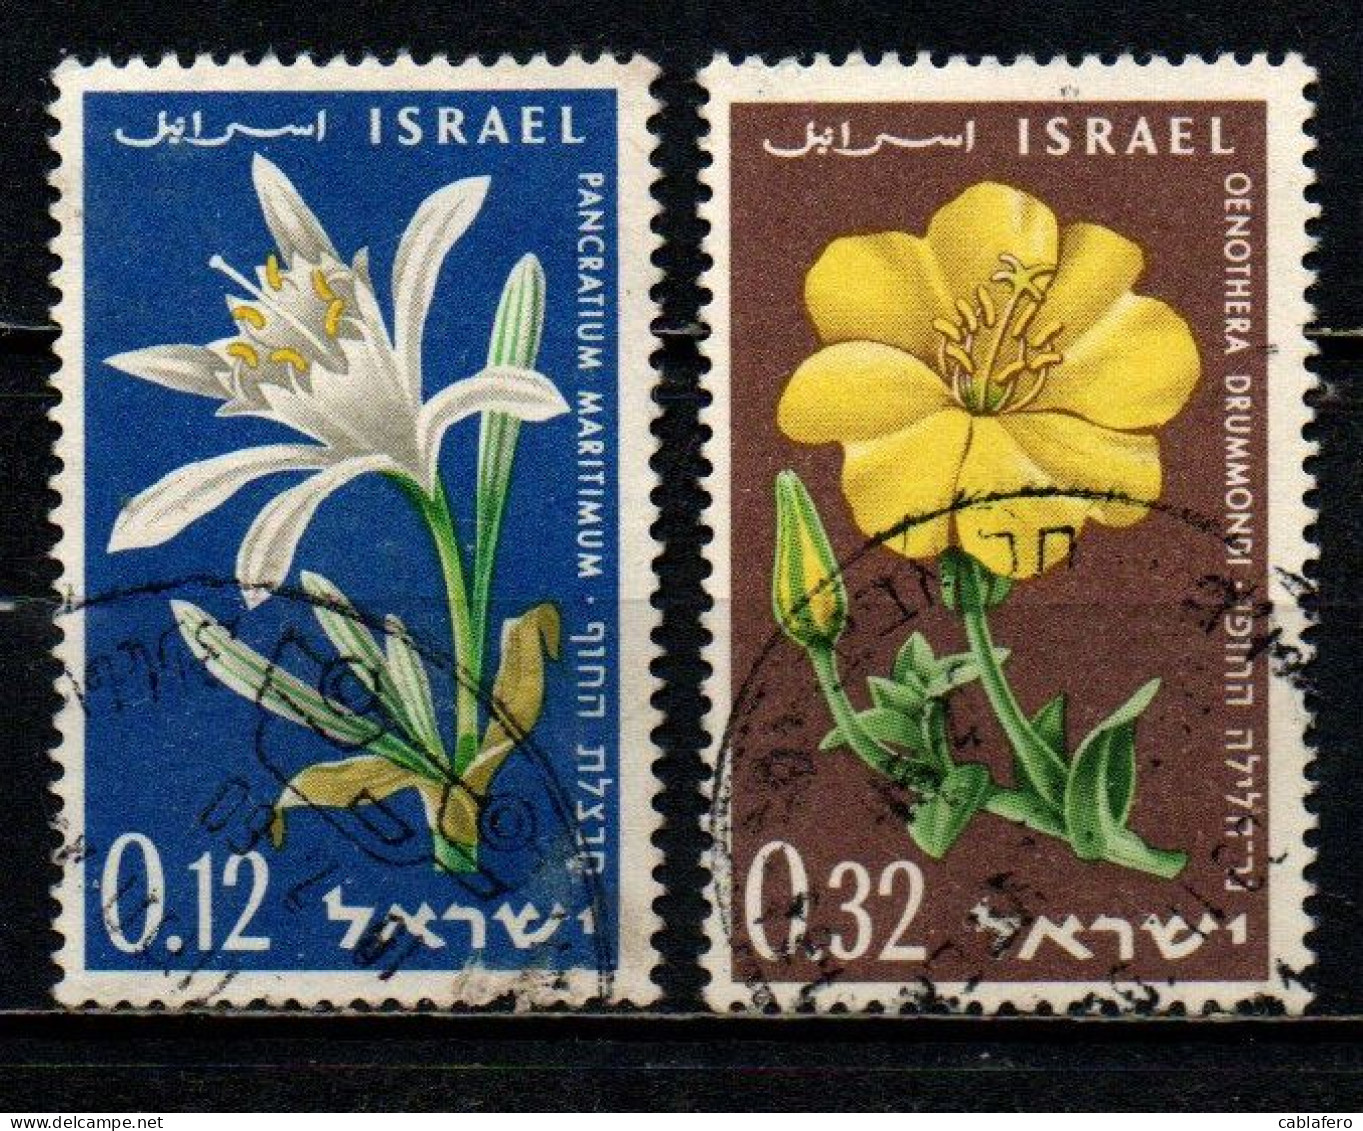 ISRAELE - 1960 - Sand Lily And Evening Primrose - Memorial Day; Proclamation Of State Of Israel, 12th Anniv - USATI - Usati (senza Tab)